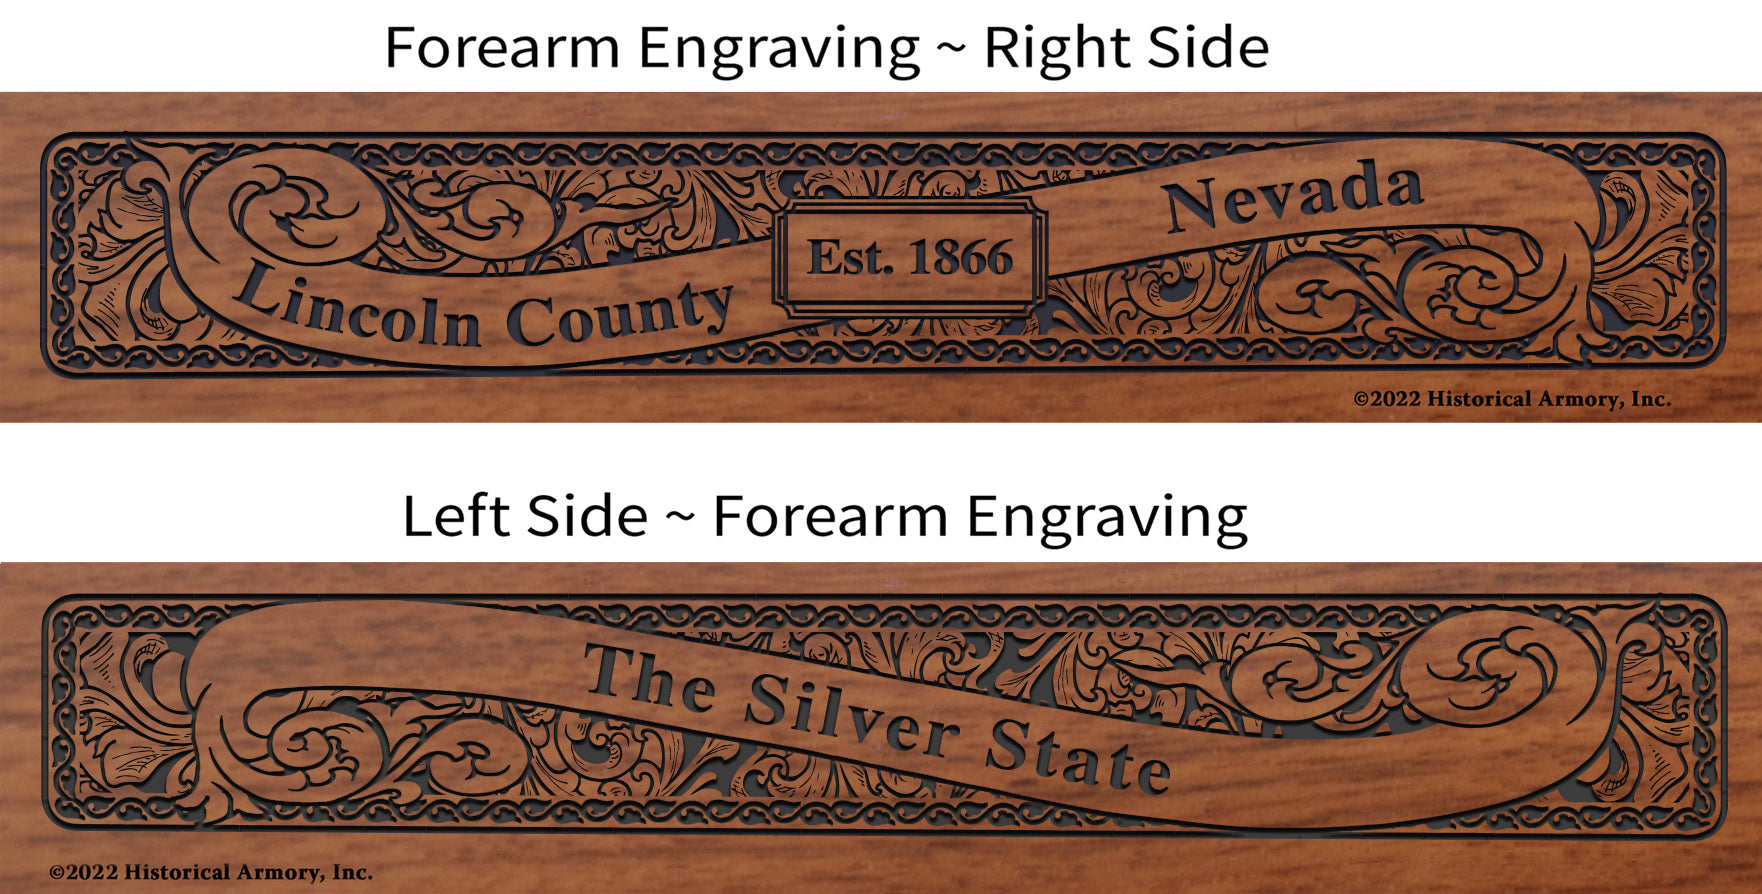 Lincoln County Nevada Engraved Rifle Forearm